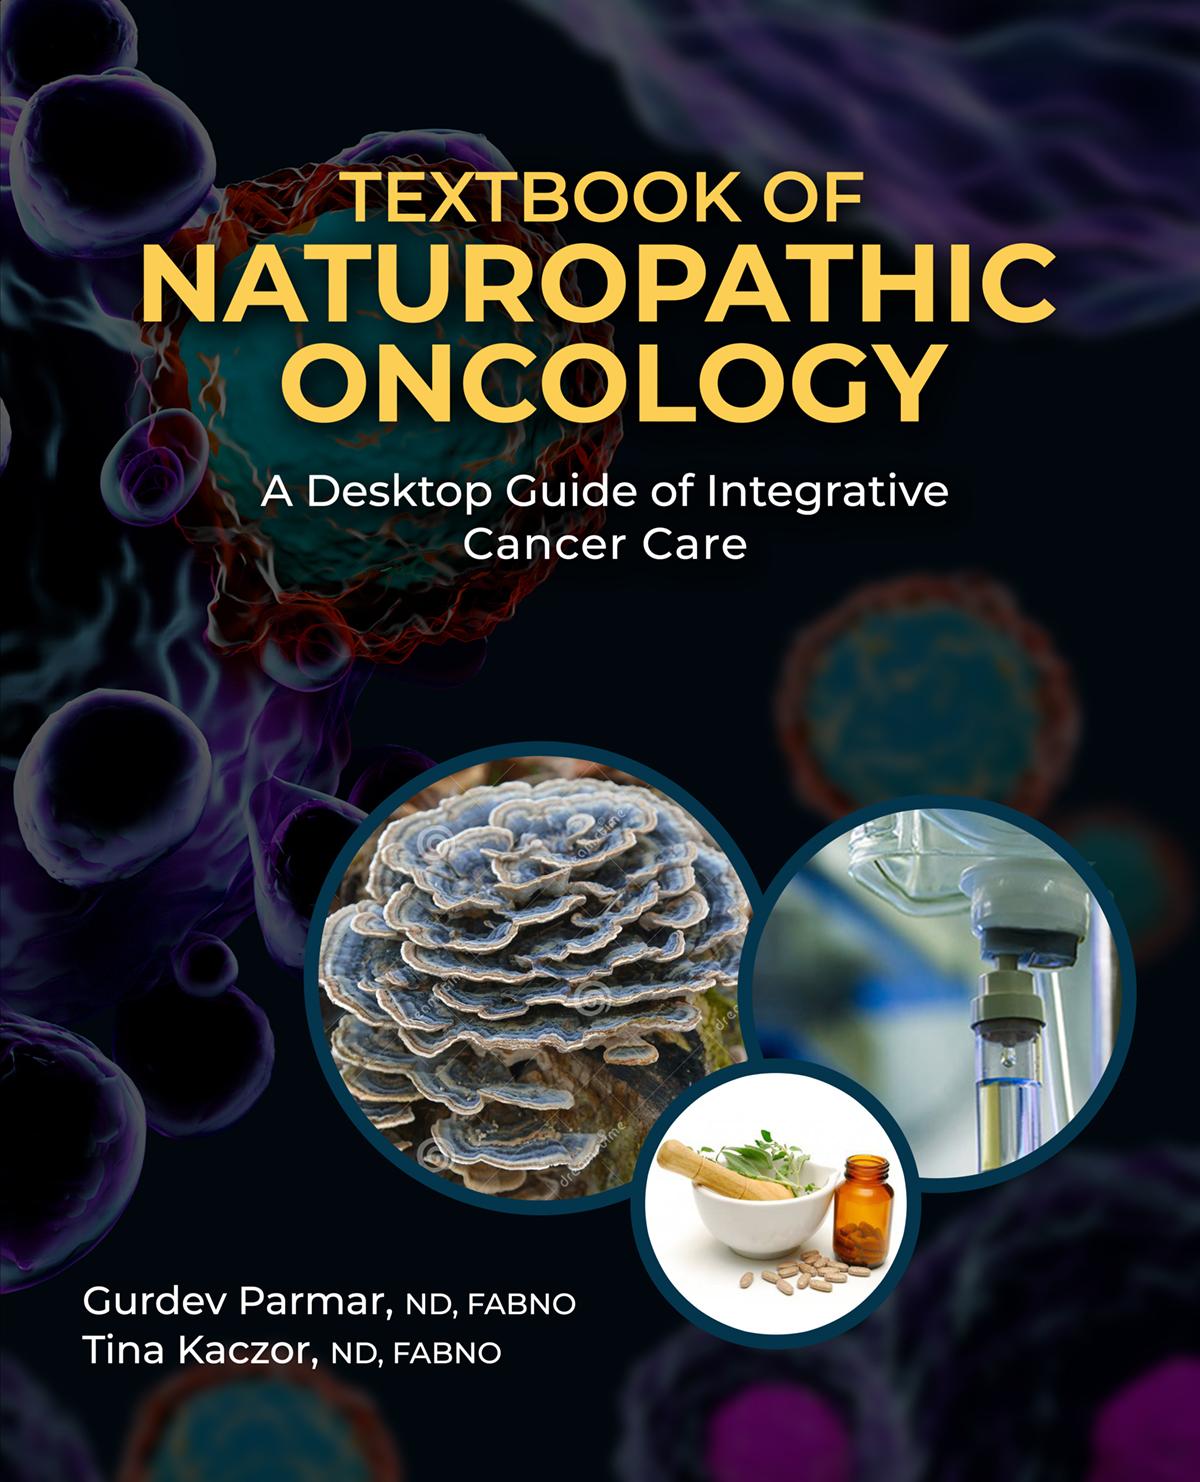 A Naturopathic Doctor's Role In Cancer Treatment